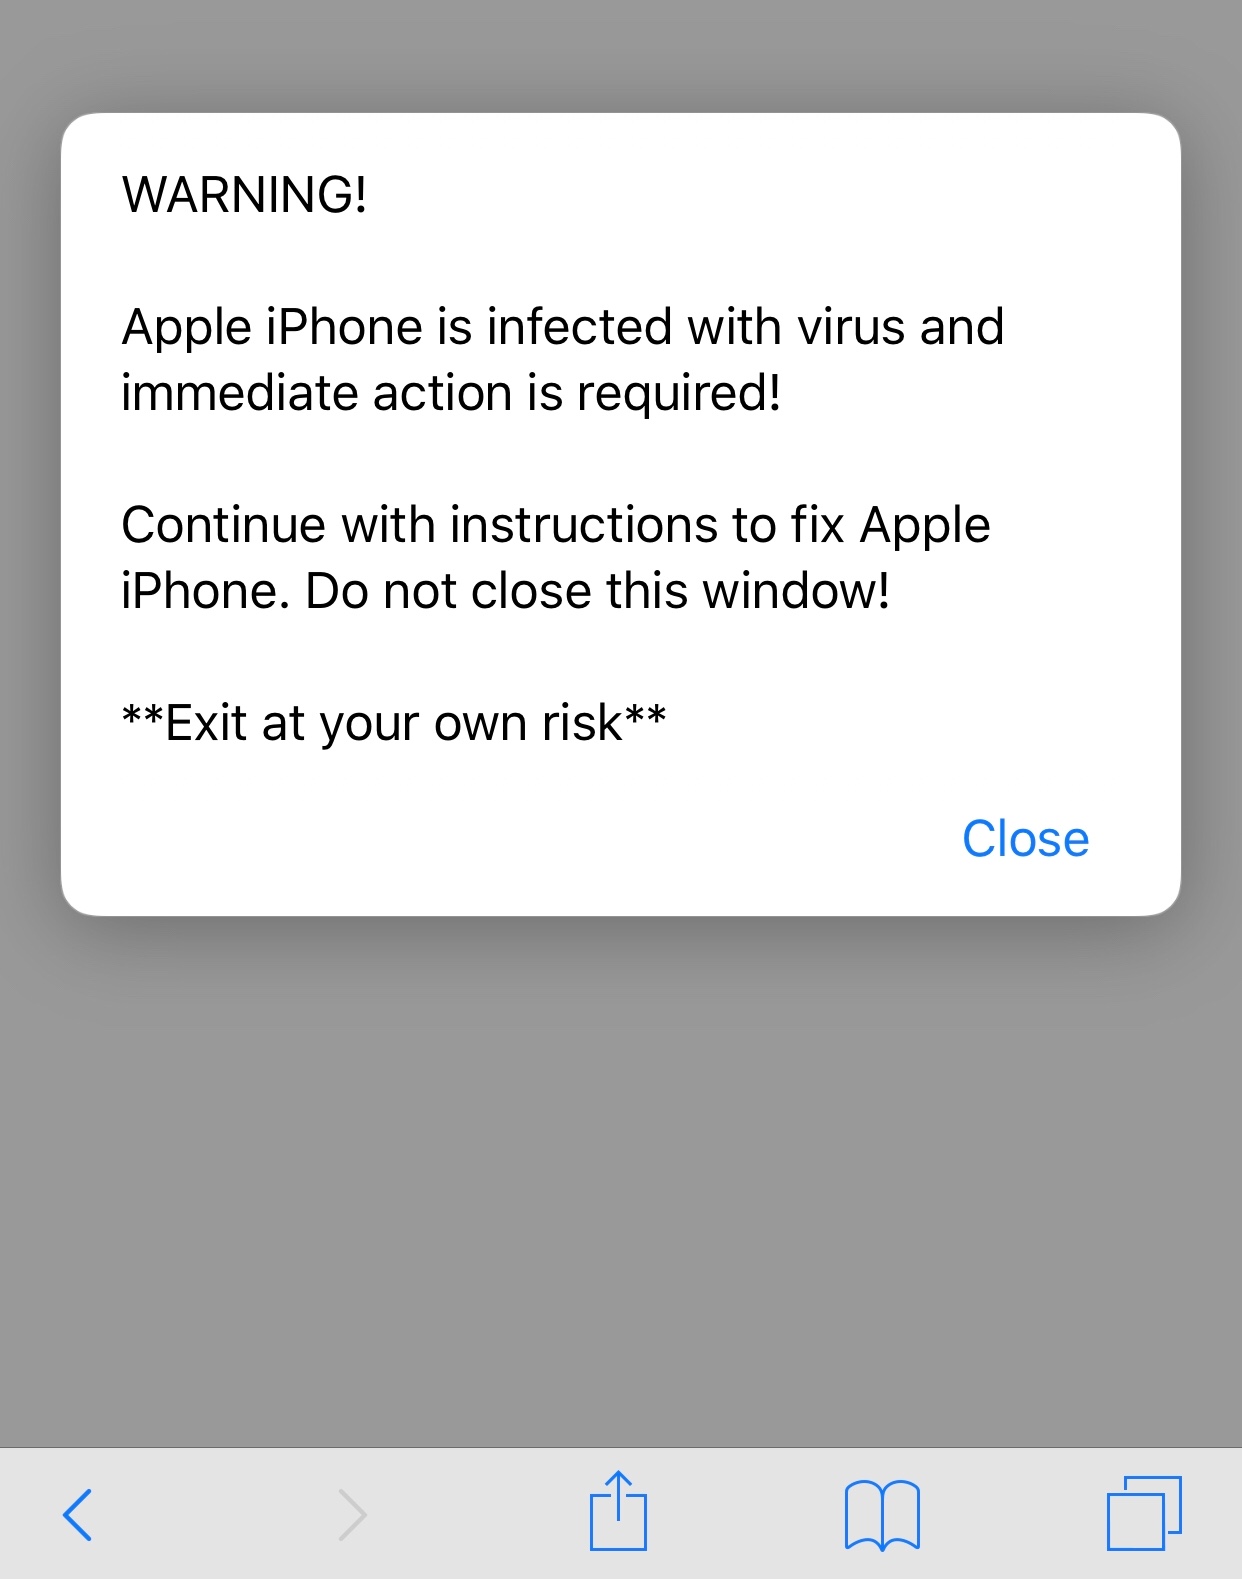 Did a pop-up on your iPhone or Android say you have a virus? Be careful before you click anything. It could be one of the top cyber threats of 2022.